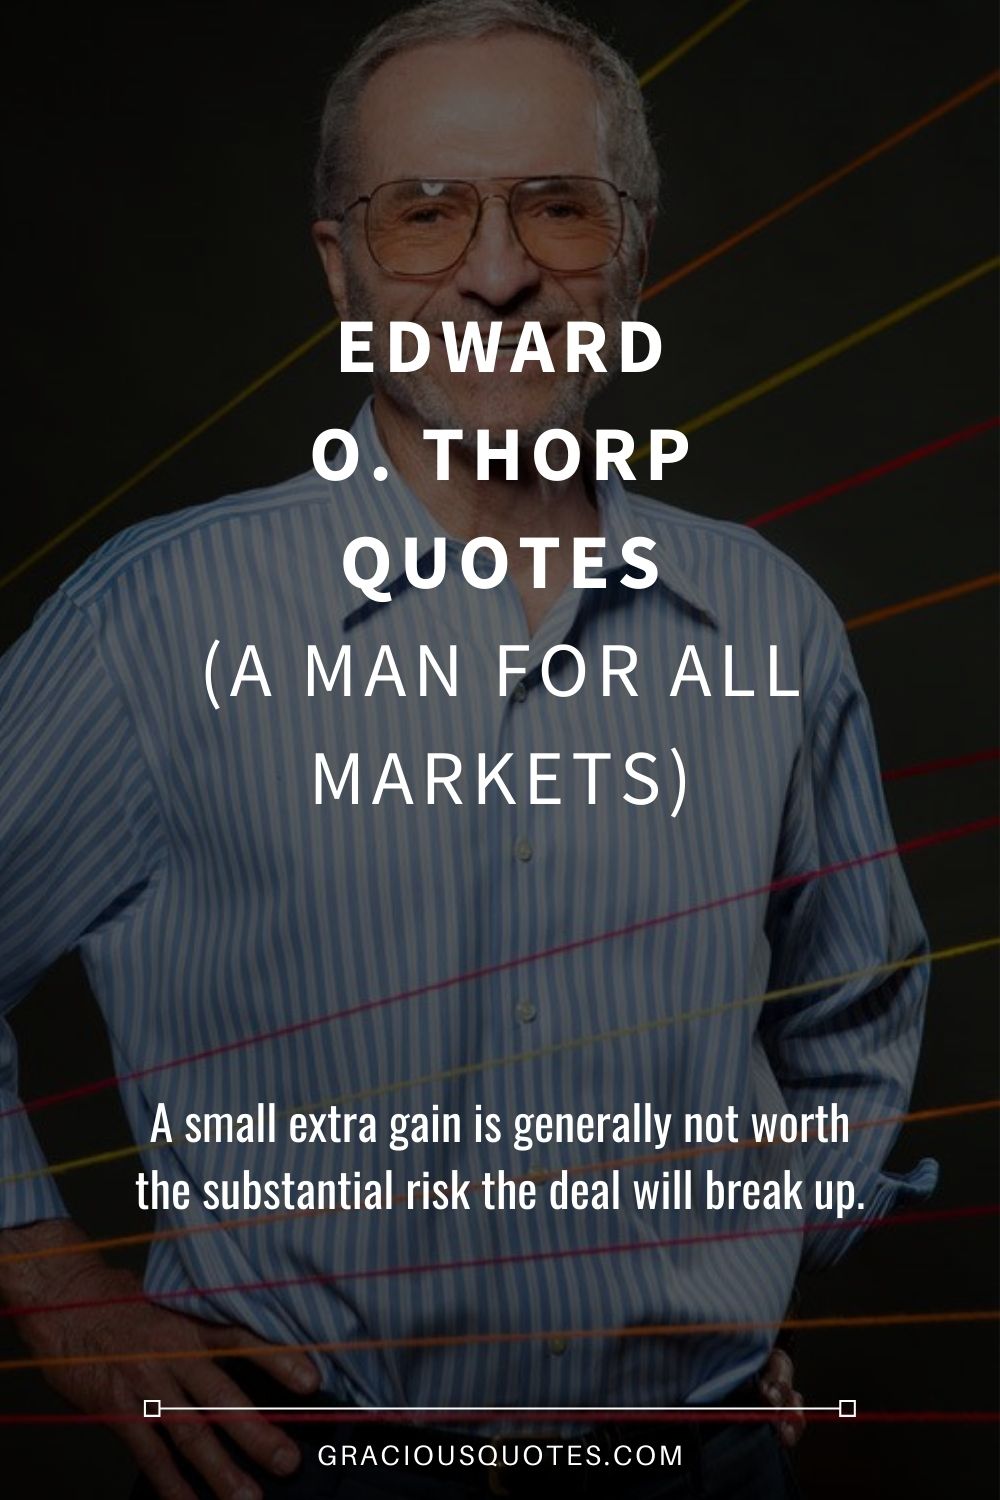 Edward O. Thorp Quotes (A Man for All Markets) - Gracious Quotes